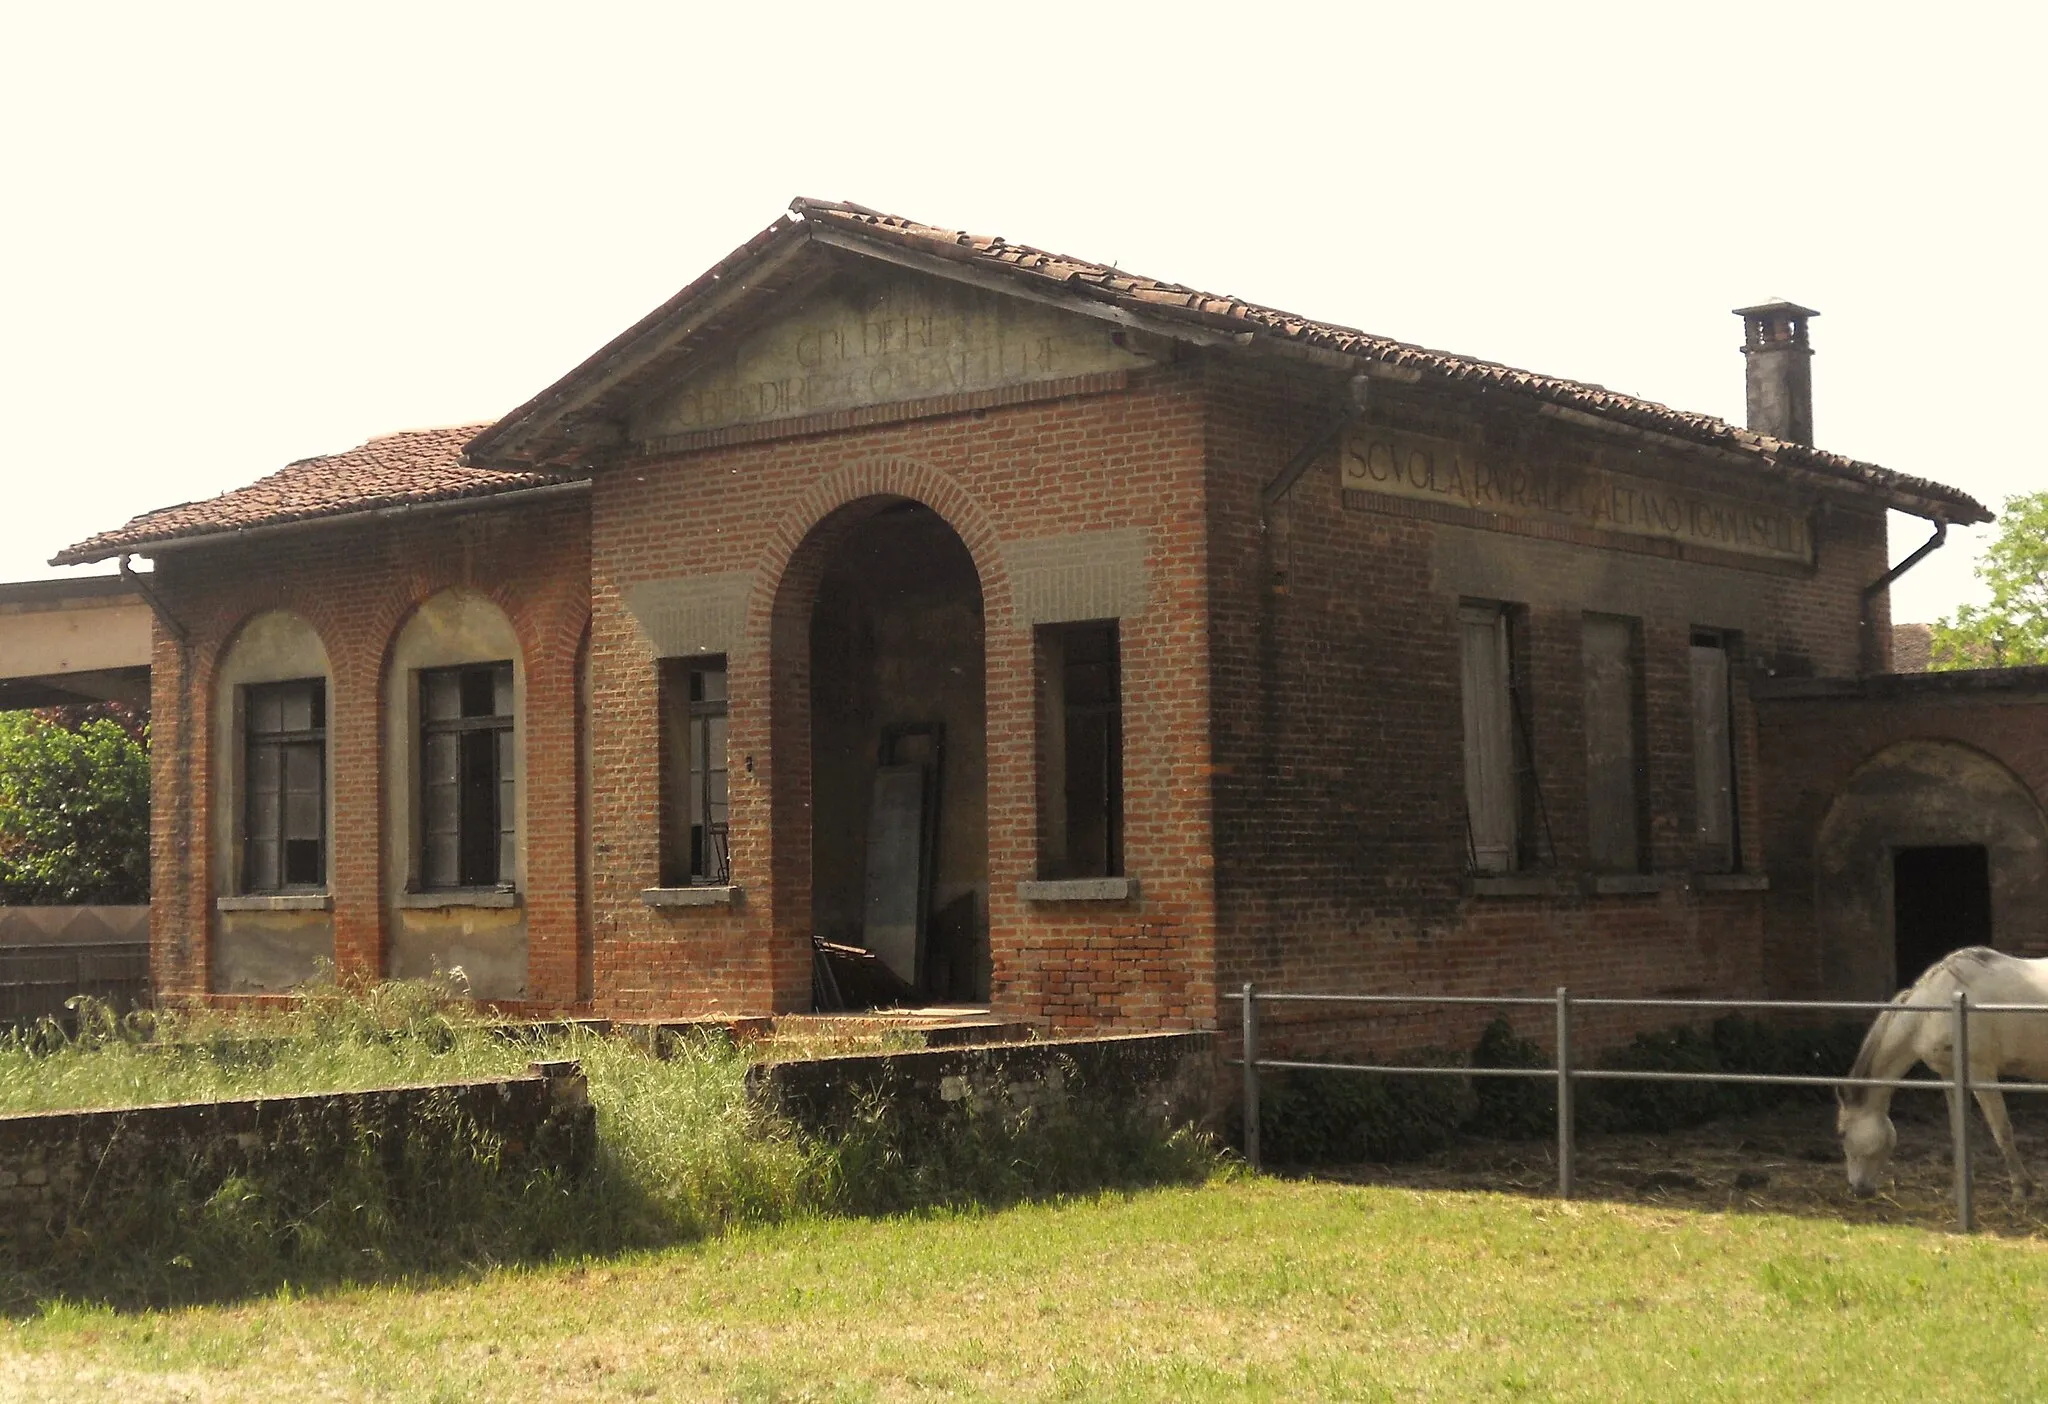 Photo showing: Ex-Italian rural school of the fascist era in the countryside near Castelleone, in Italy. On the front and on the side of the building is written "CREDERE OBBEDIRE COMBATTERE" and "SCVOLA RVRALE GAETANO TOMMASELLI", that literally means "Believe, obey, fight" (a fascist slogan) and "Rural school Gaetano Tommaselli"